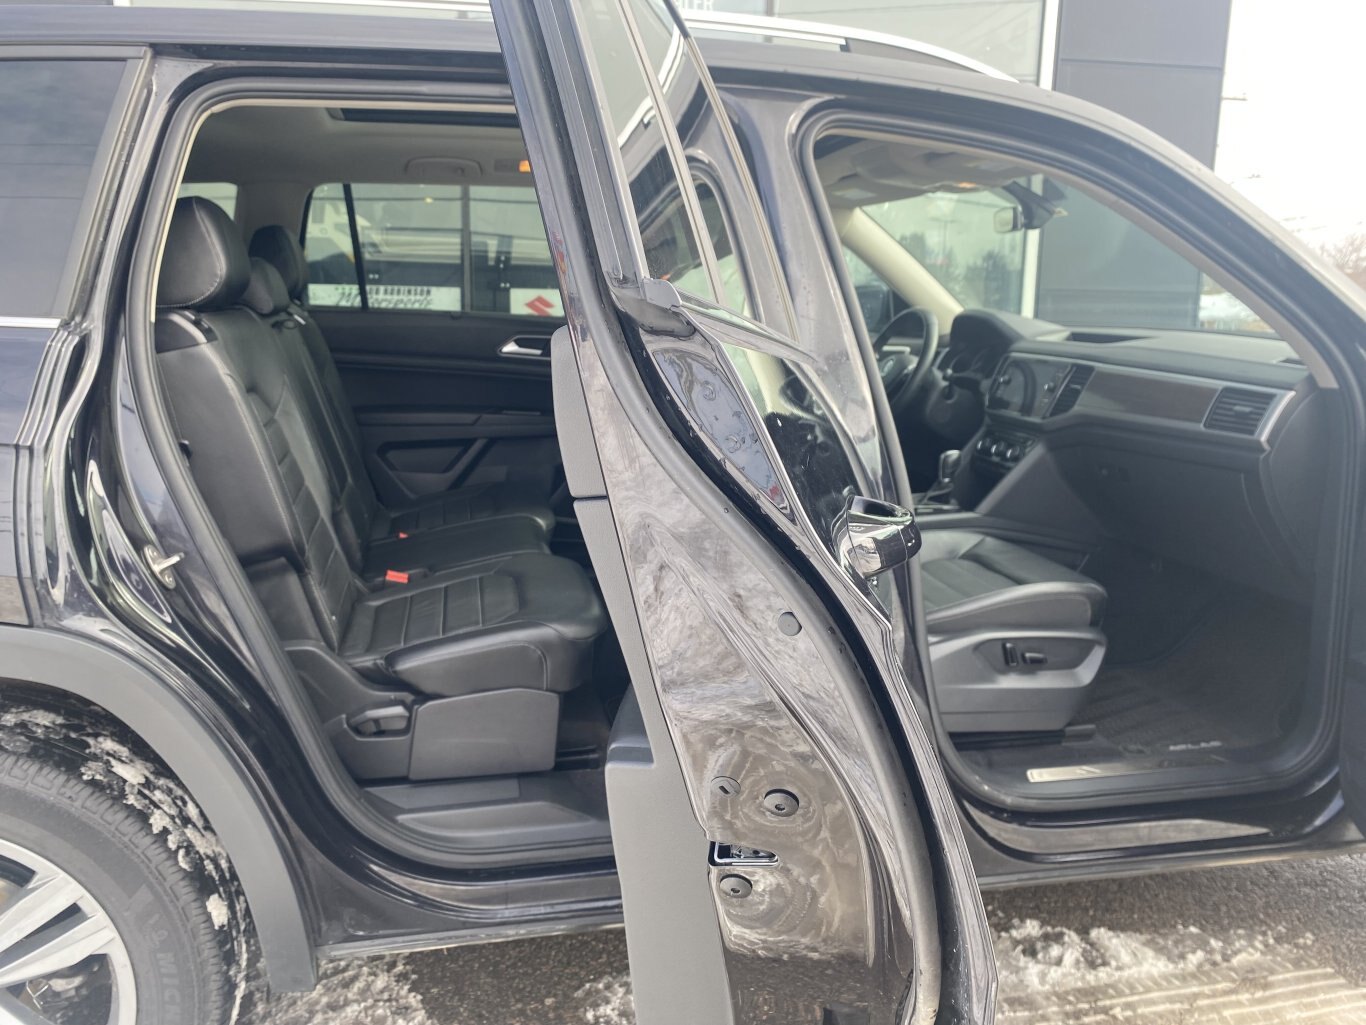 2019 VOLKSWAGEN ATLAS HIGHLINE R LINE PACKAGE AWD 3RD ROW SEATING WITH SUNROOF, LEATHER SEATS, HEATED SEATS, HEATED STEERING WHEEL, REMOTE START, POWER TRUNK, REAR VIEW CAMERA & NAVIGATION!!